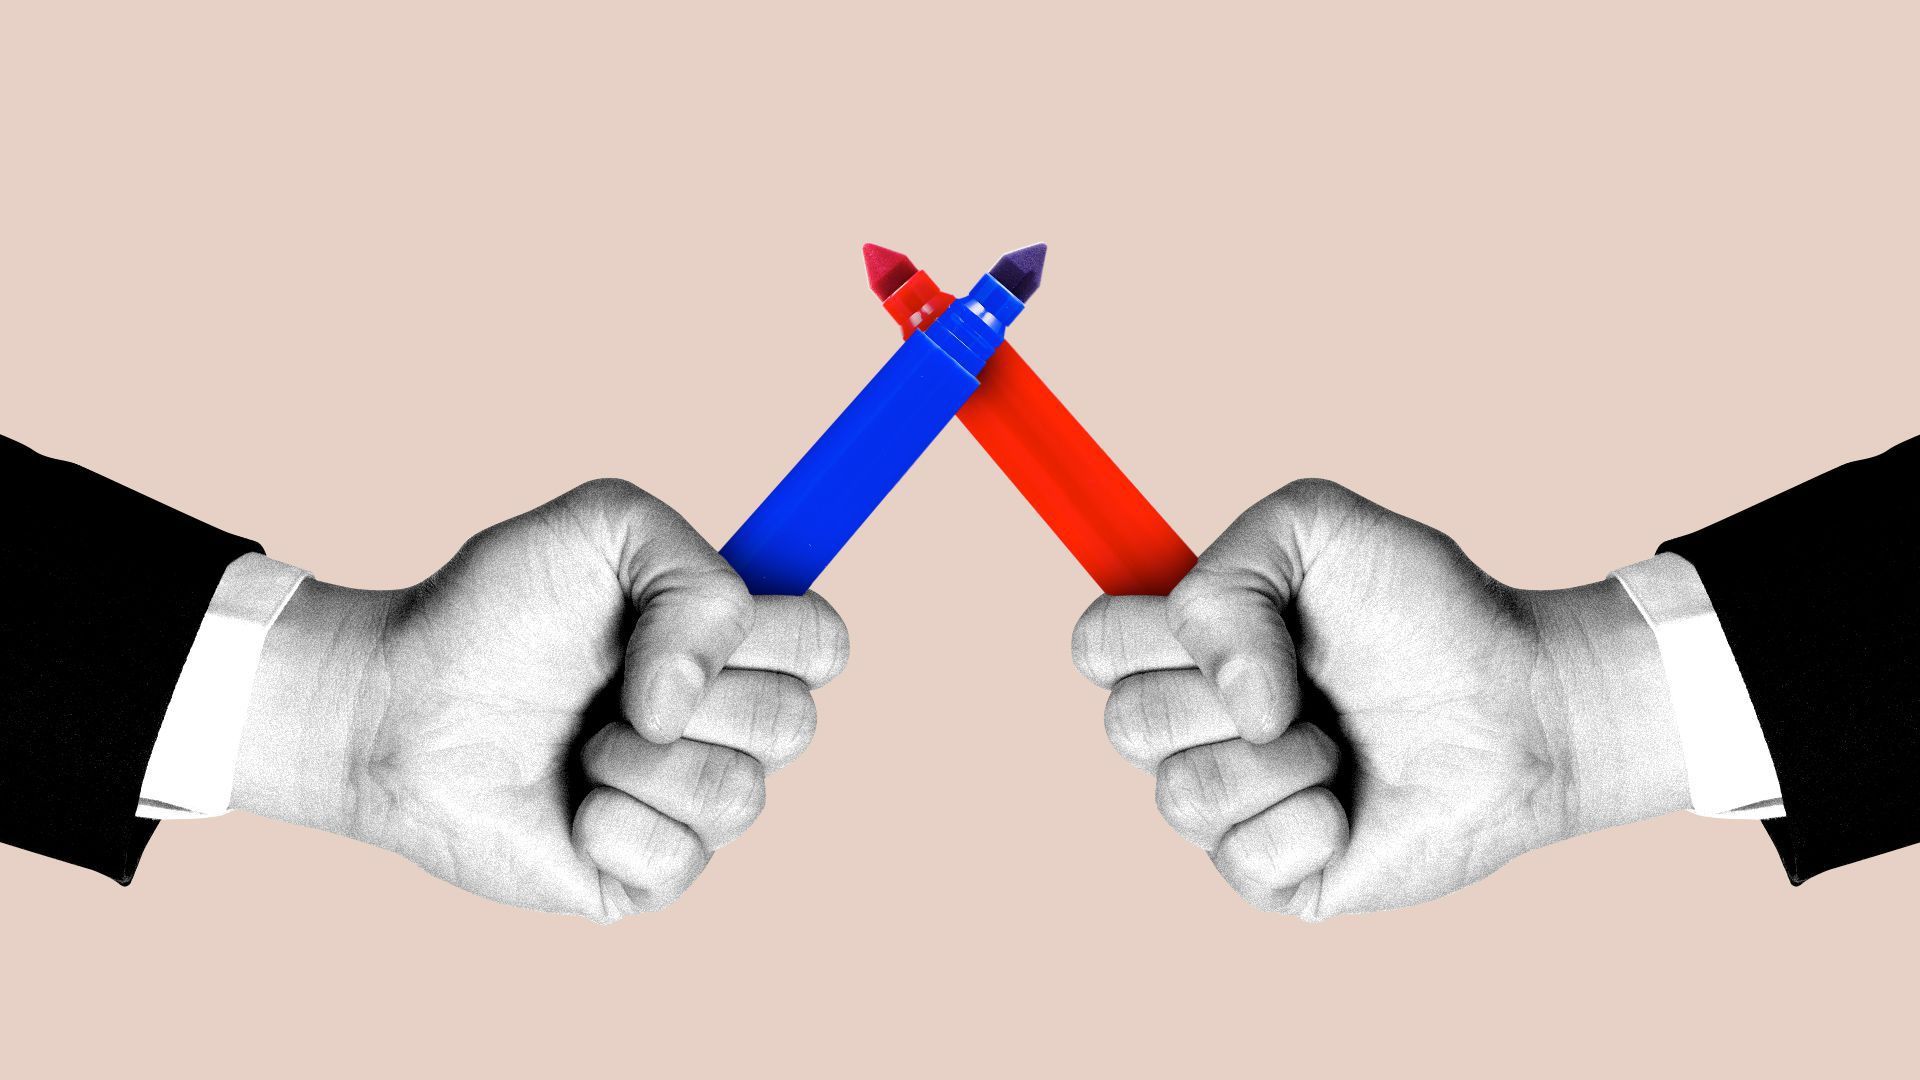 An illustration shows two hands holding red and blue markers.